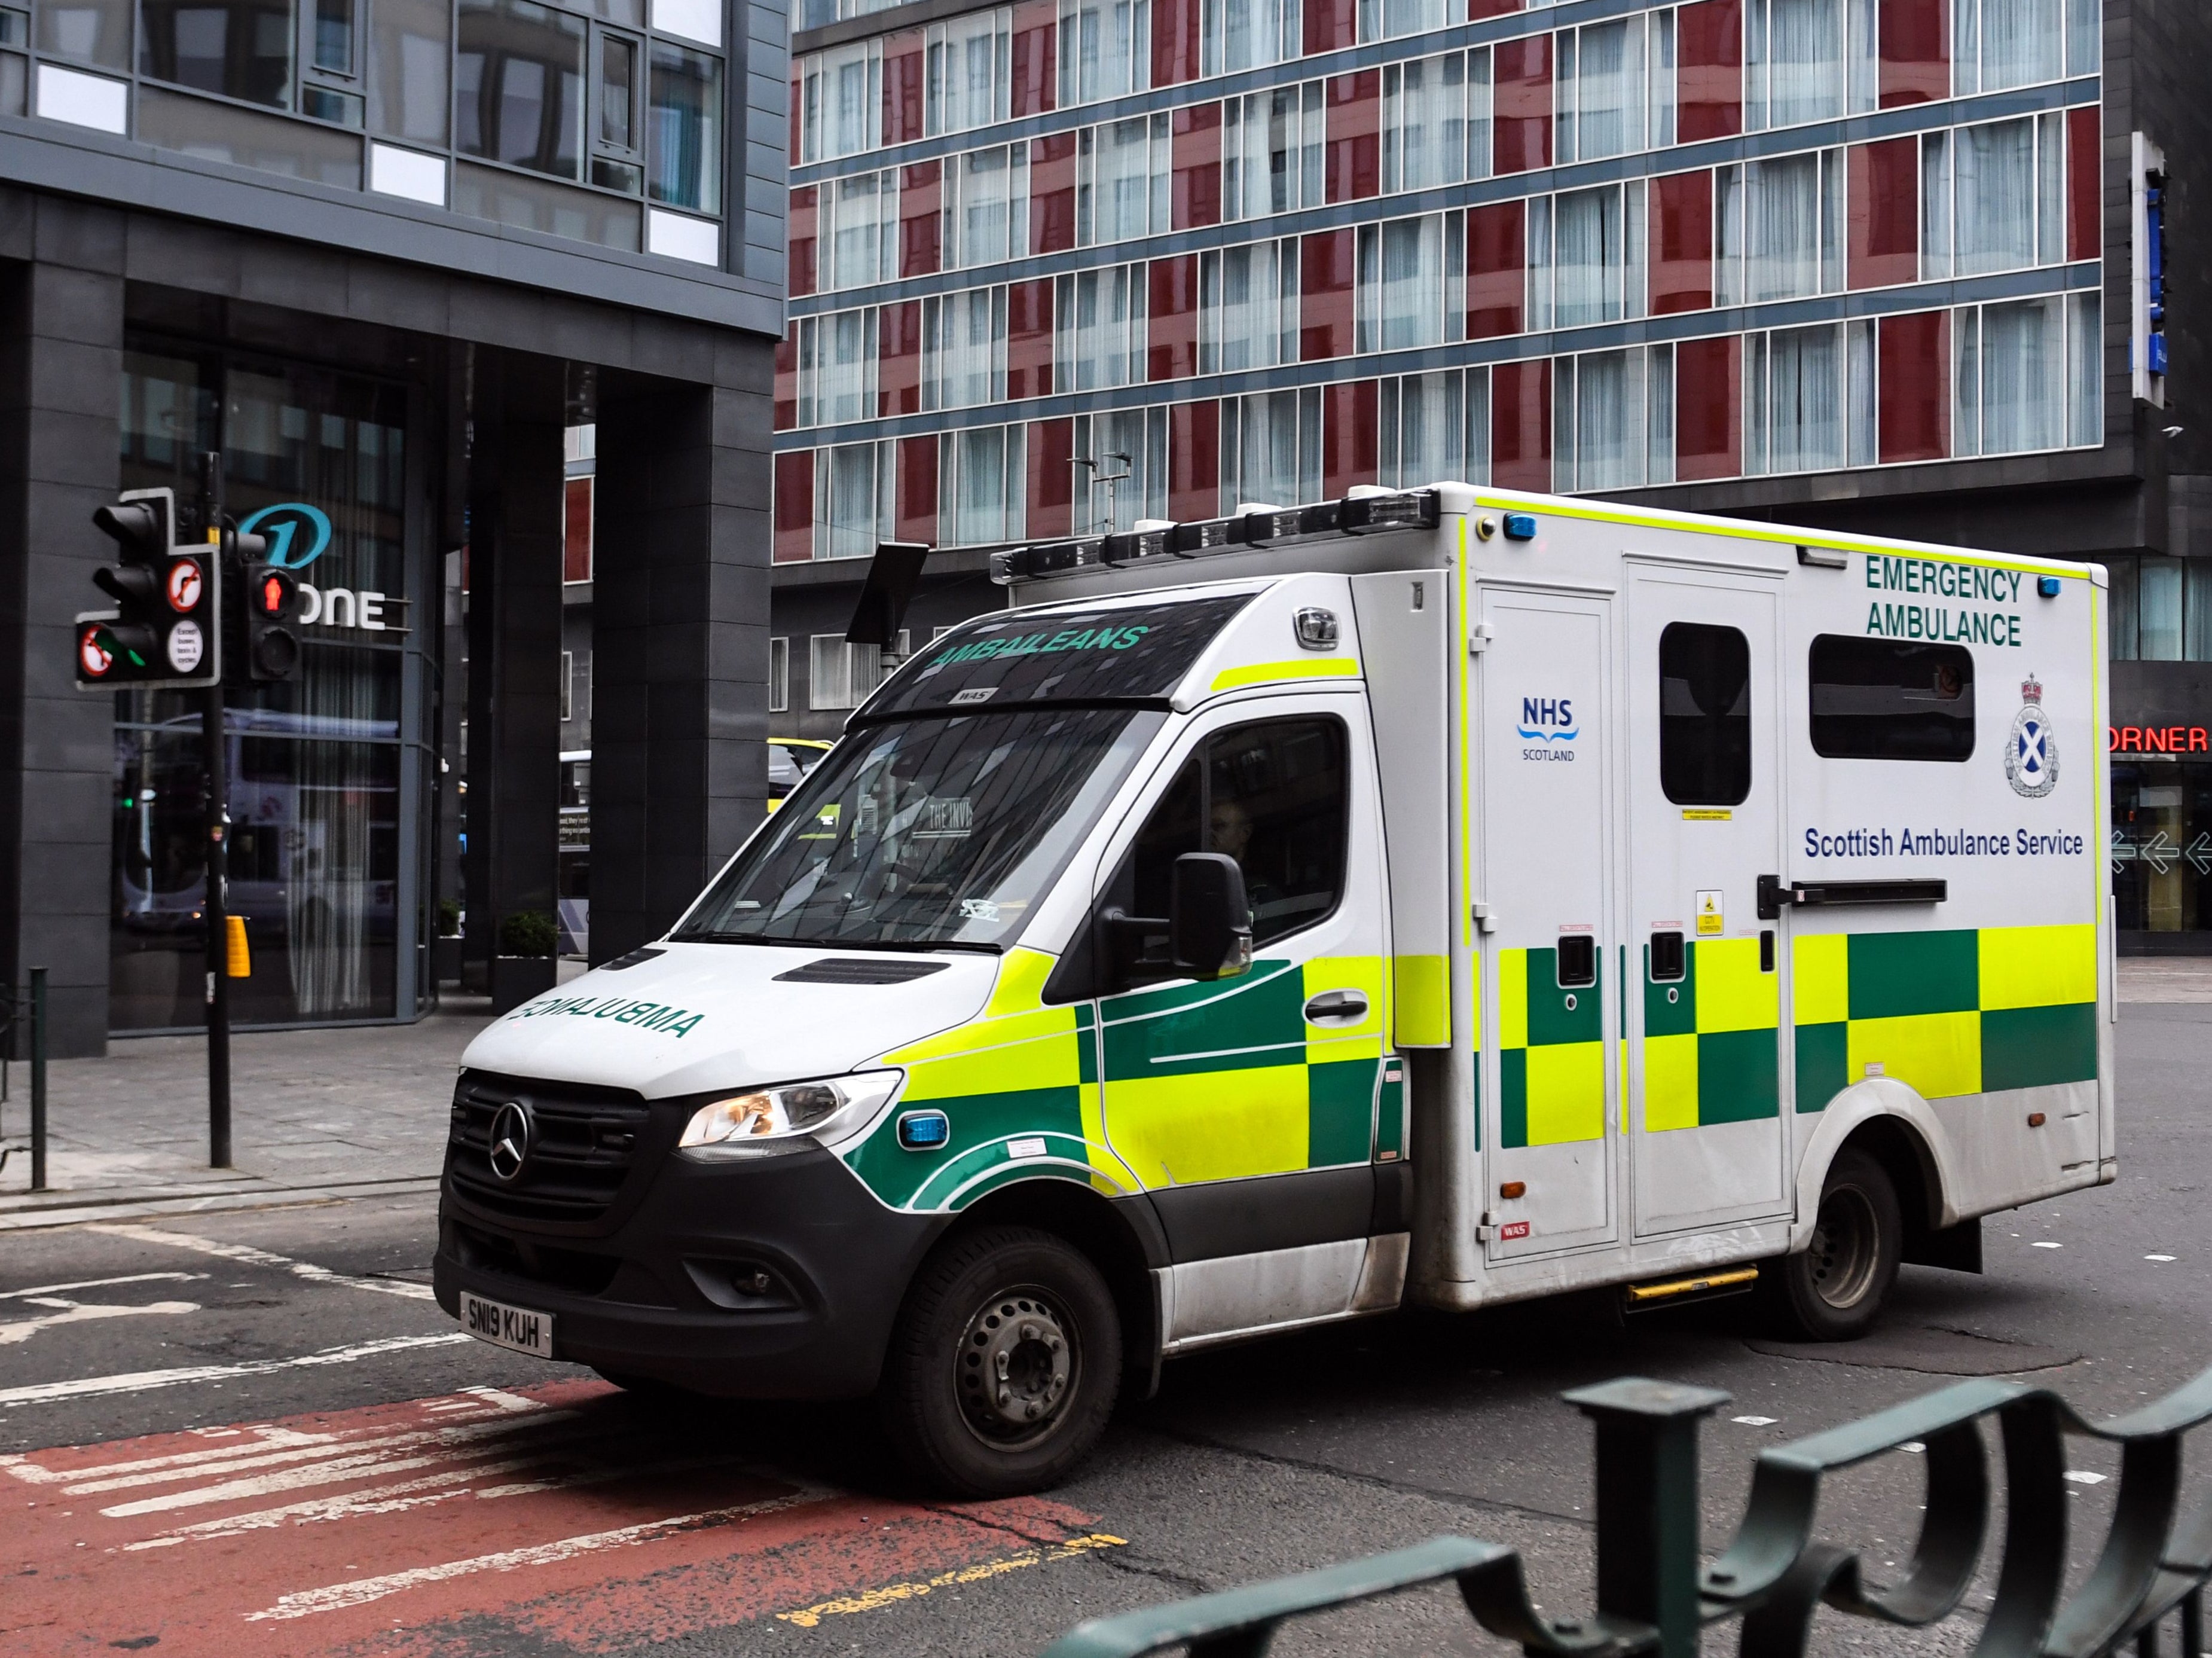 The Scottish government said that a combination of factors, mainly the pandemic, has put the ambulance service under severe pressures